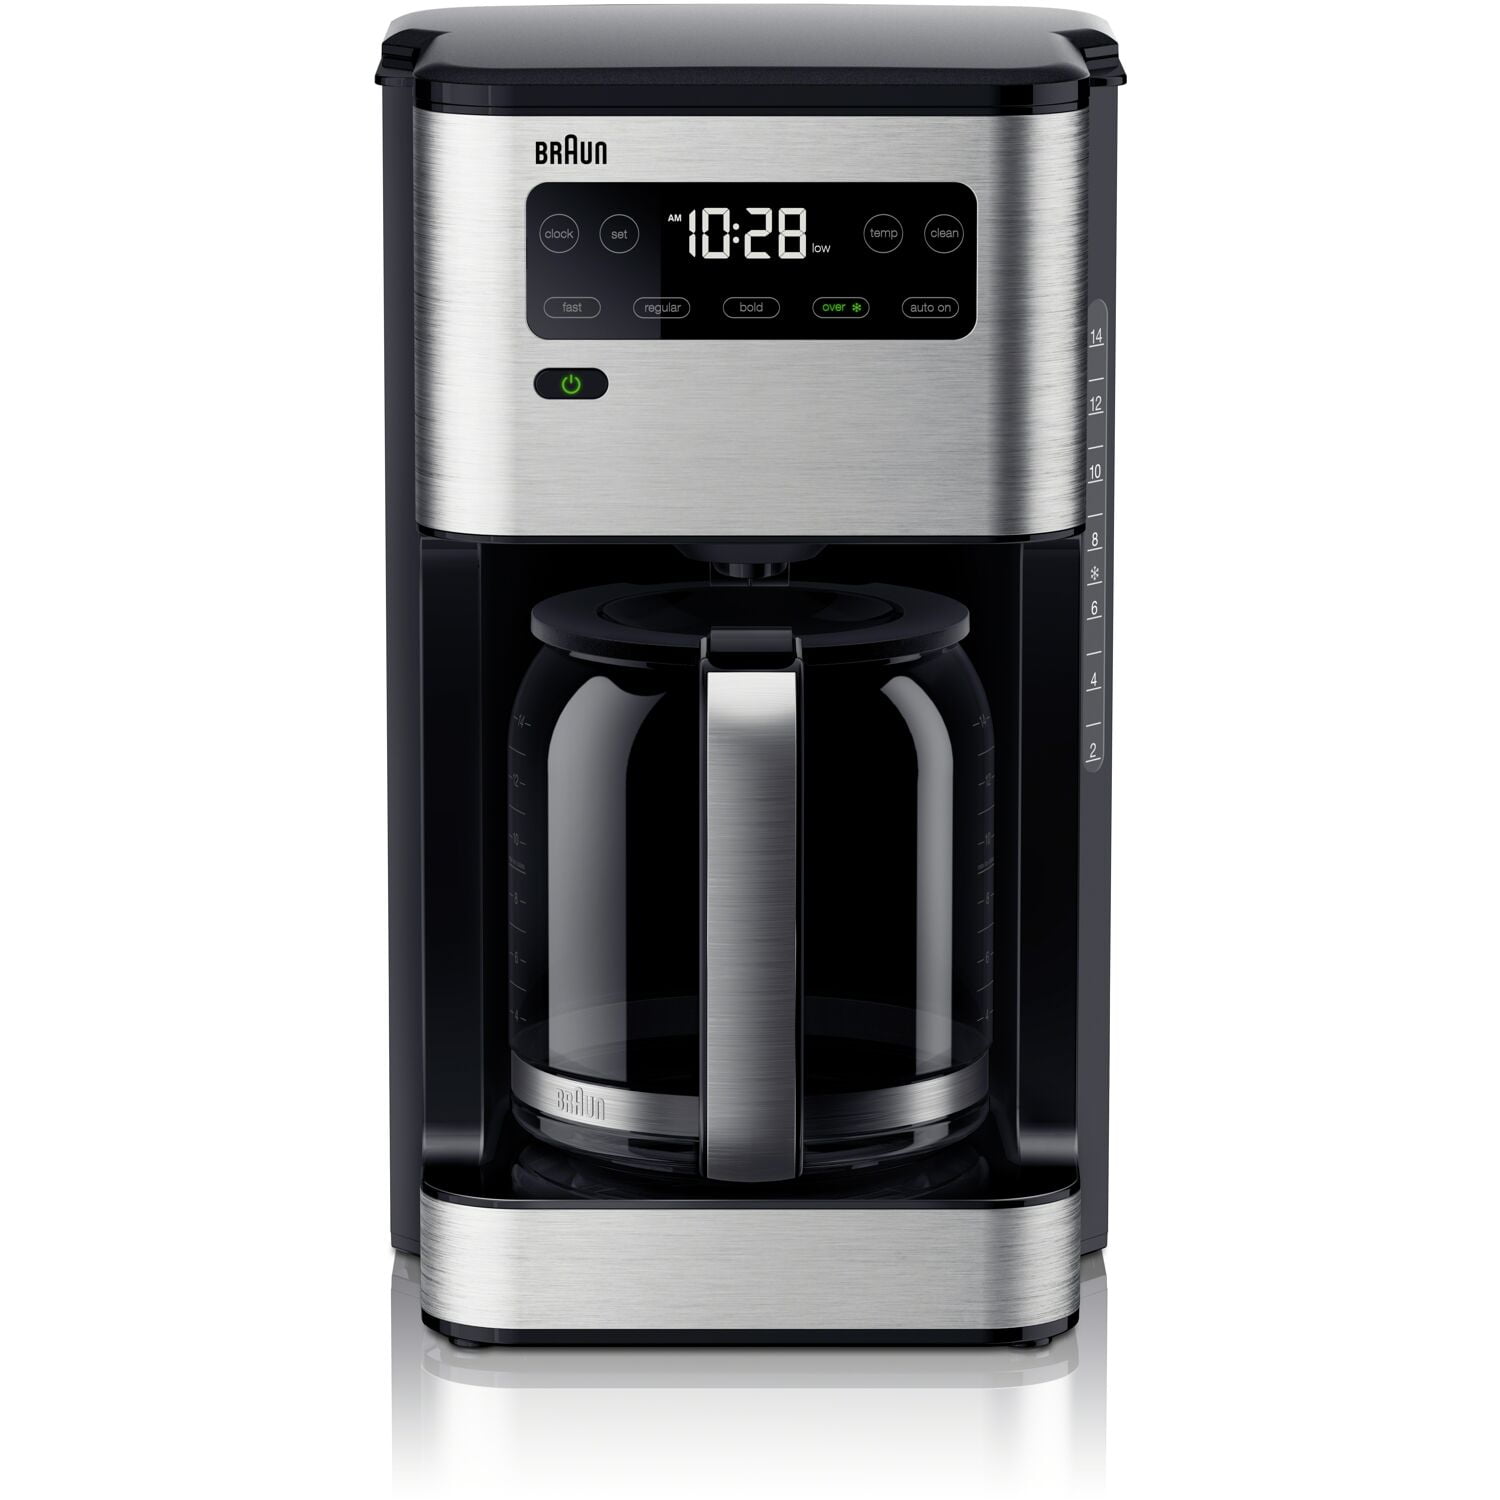  Braun KF7175 BrewSense Drip Coffee Maker with Thermal Carafe,  10 Cup: Home & Kitchen